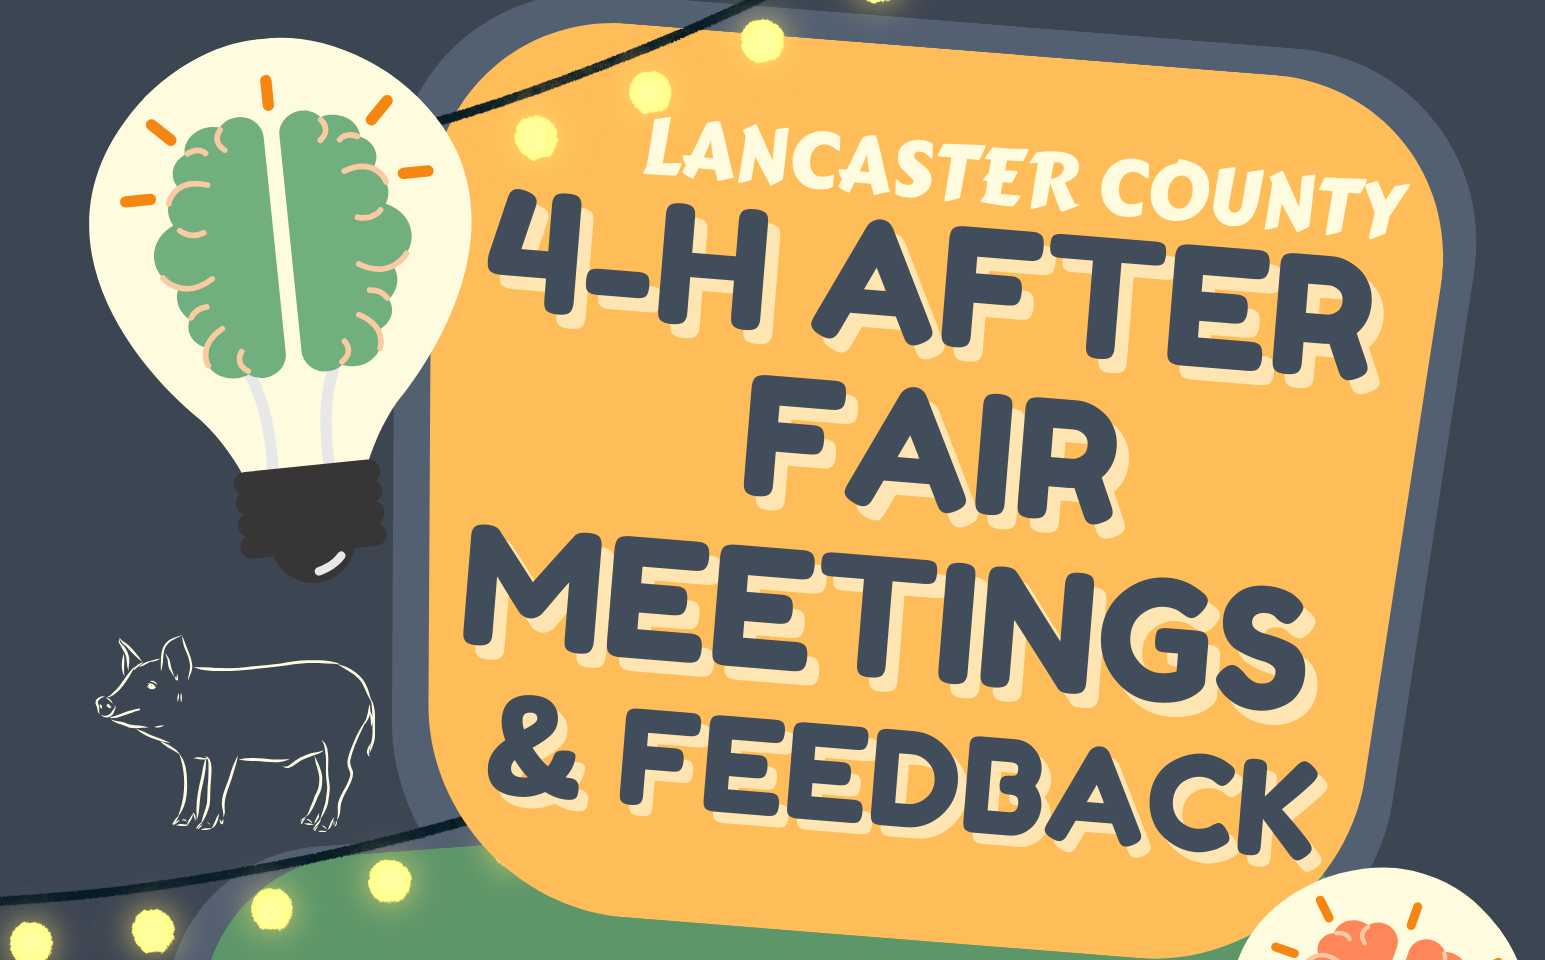 Lancaster County After Fair Meetings trim.png